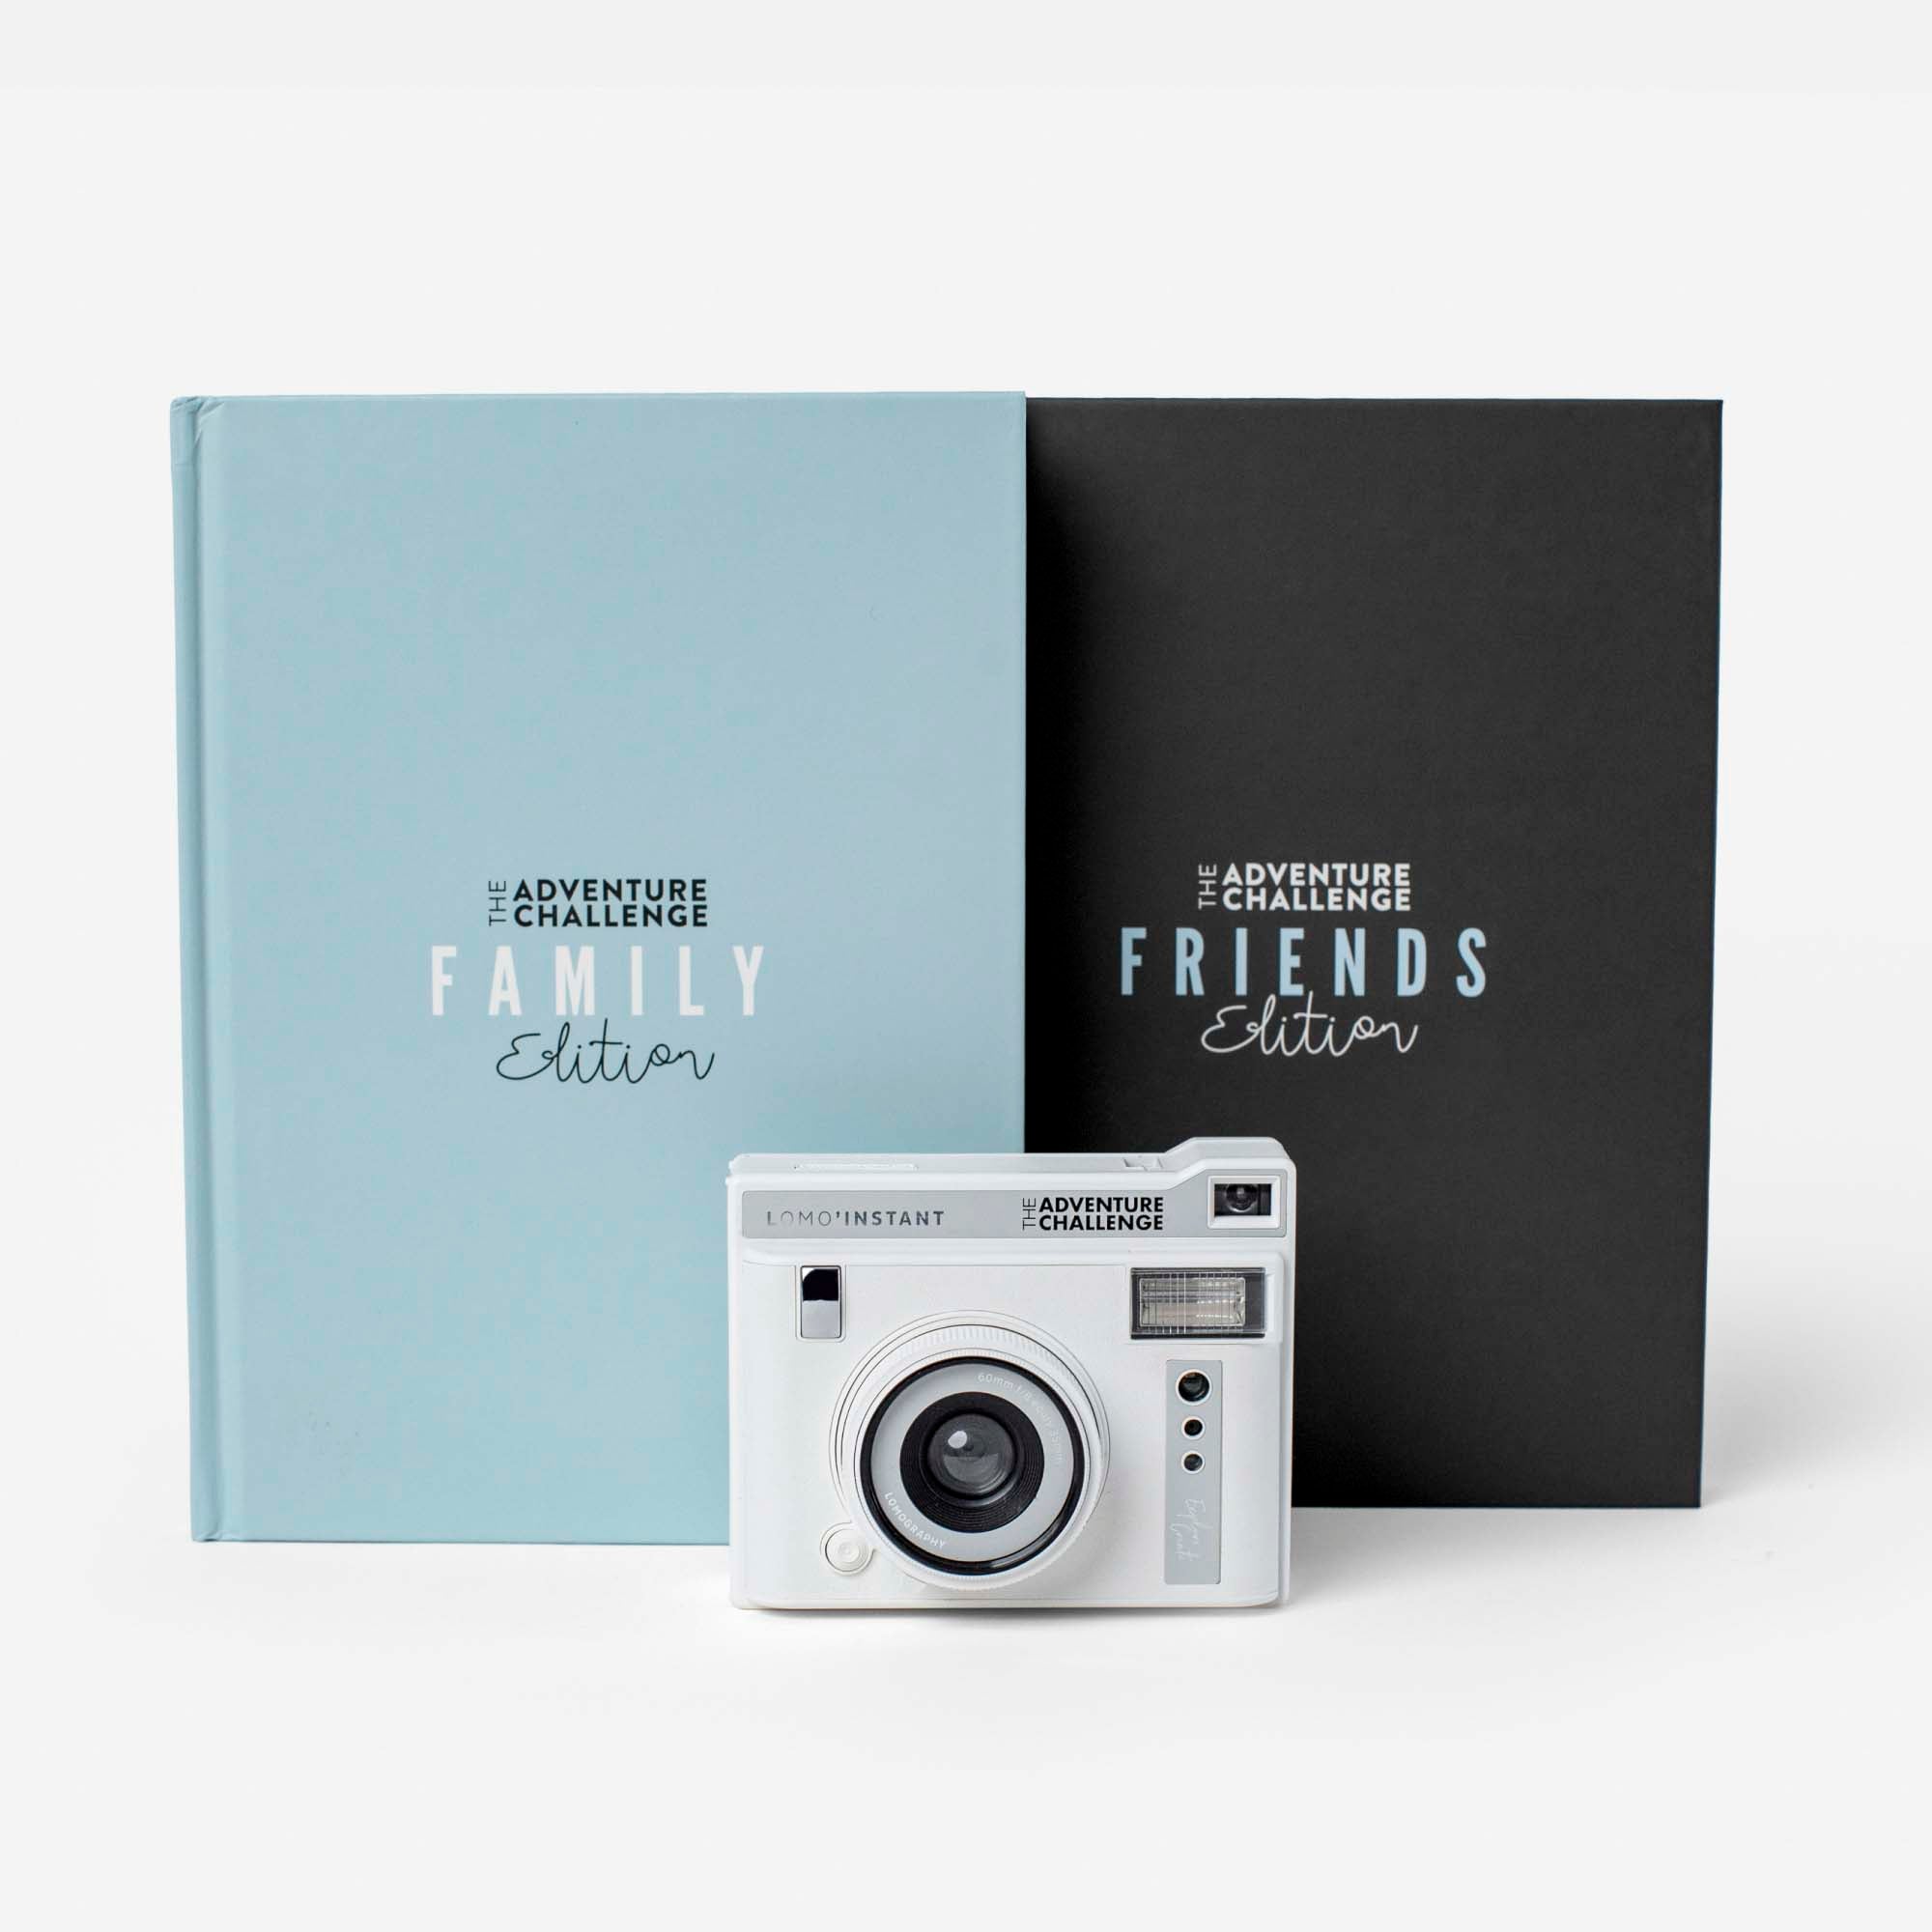 Friends & Family Editions Camera Bundle | 50 Scratch-Off Adventure Activities & Instant Camera | The Adventure Challenge